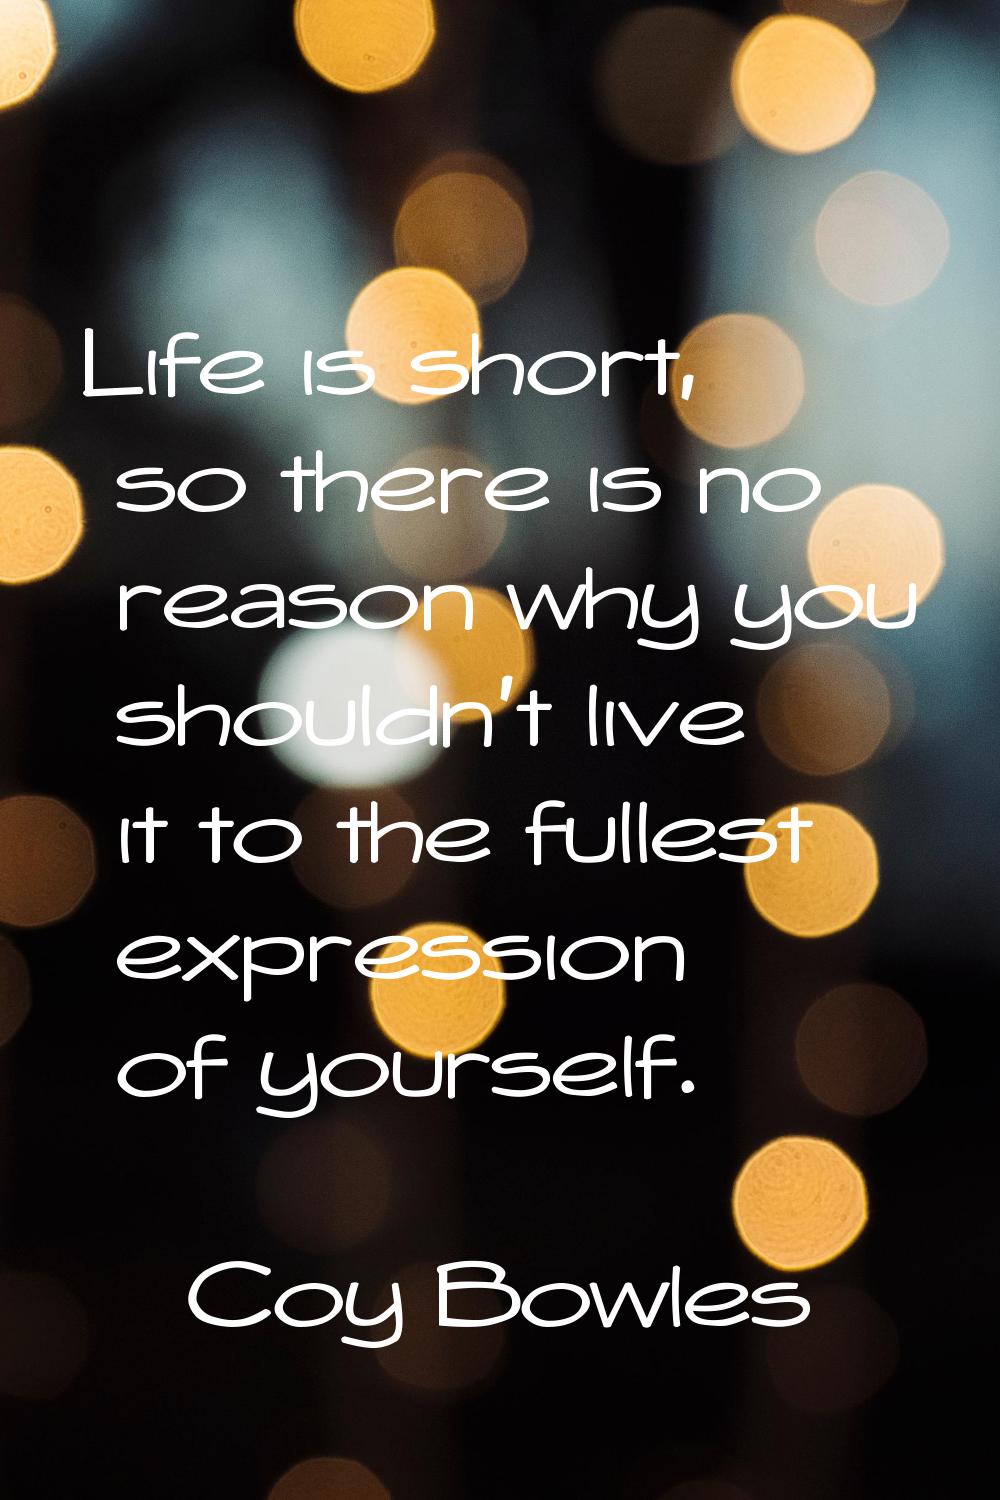 Life is short, so there is no reason why you shouldn't live it to the fullest expression of yoursel